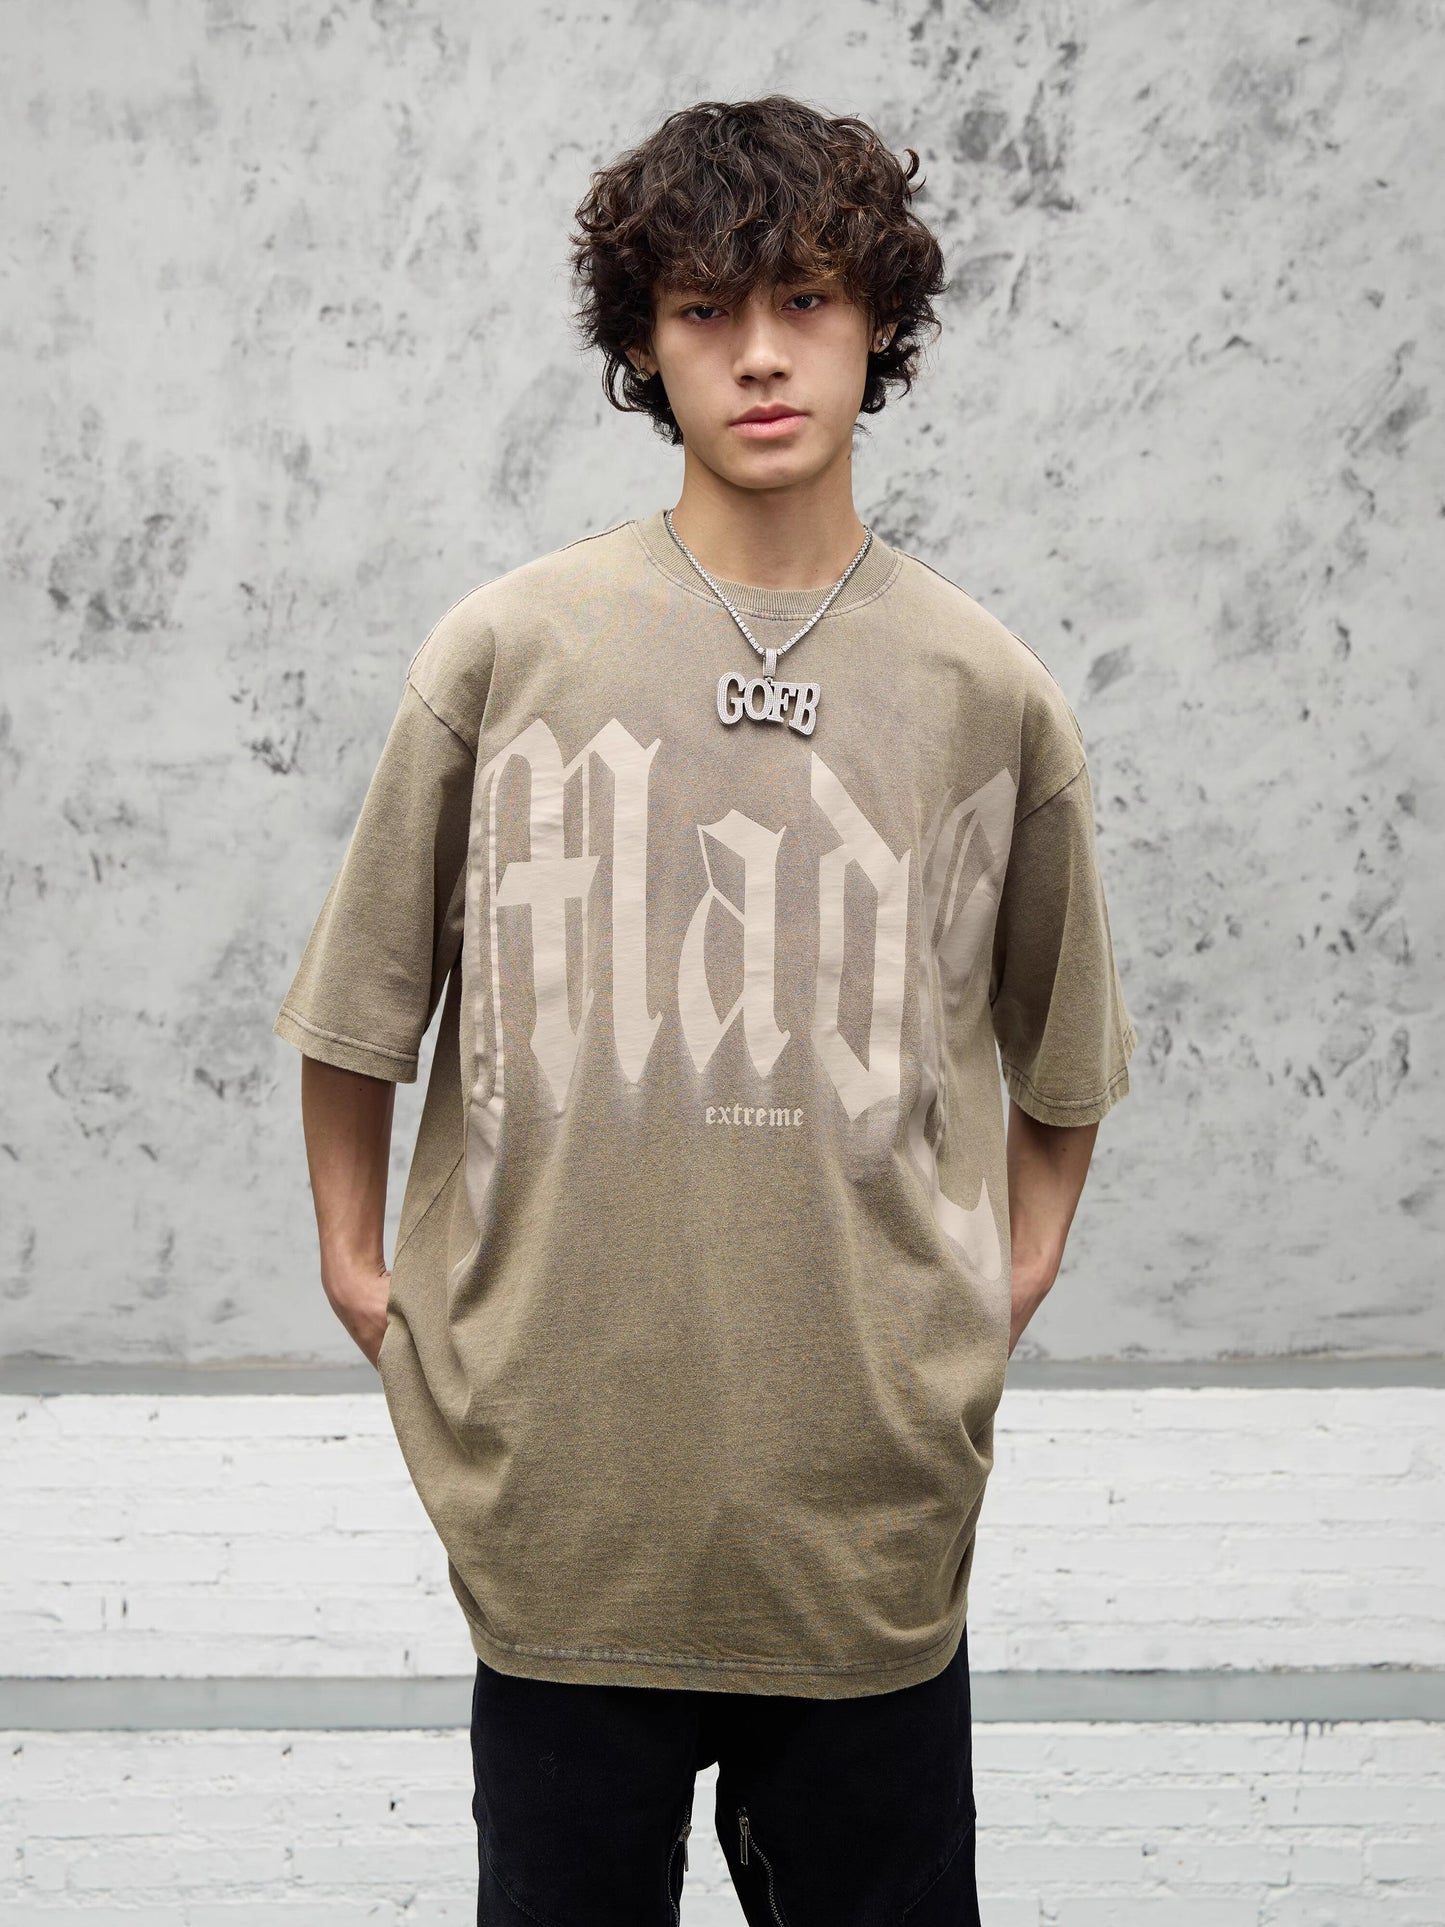 MADE EXTREME LARGE LETTERS PRINT LOOSE WASHED T-SHIRT